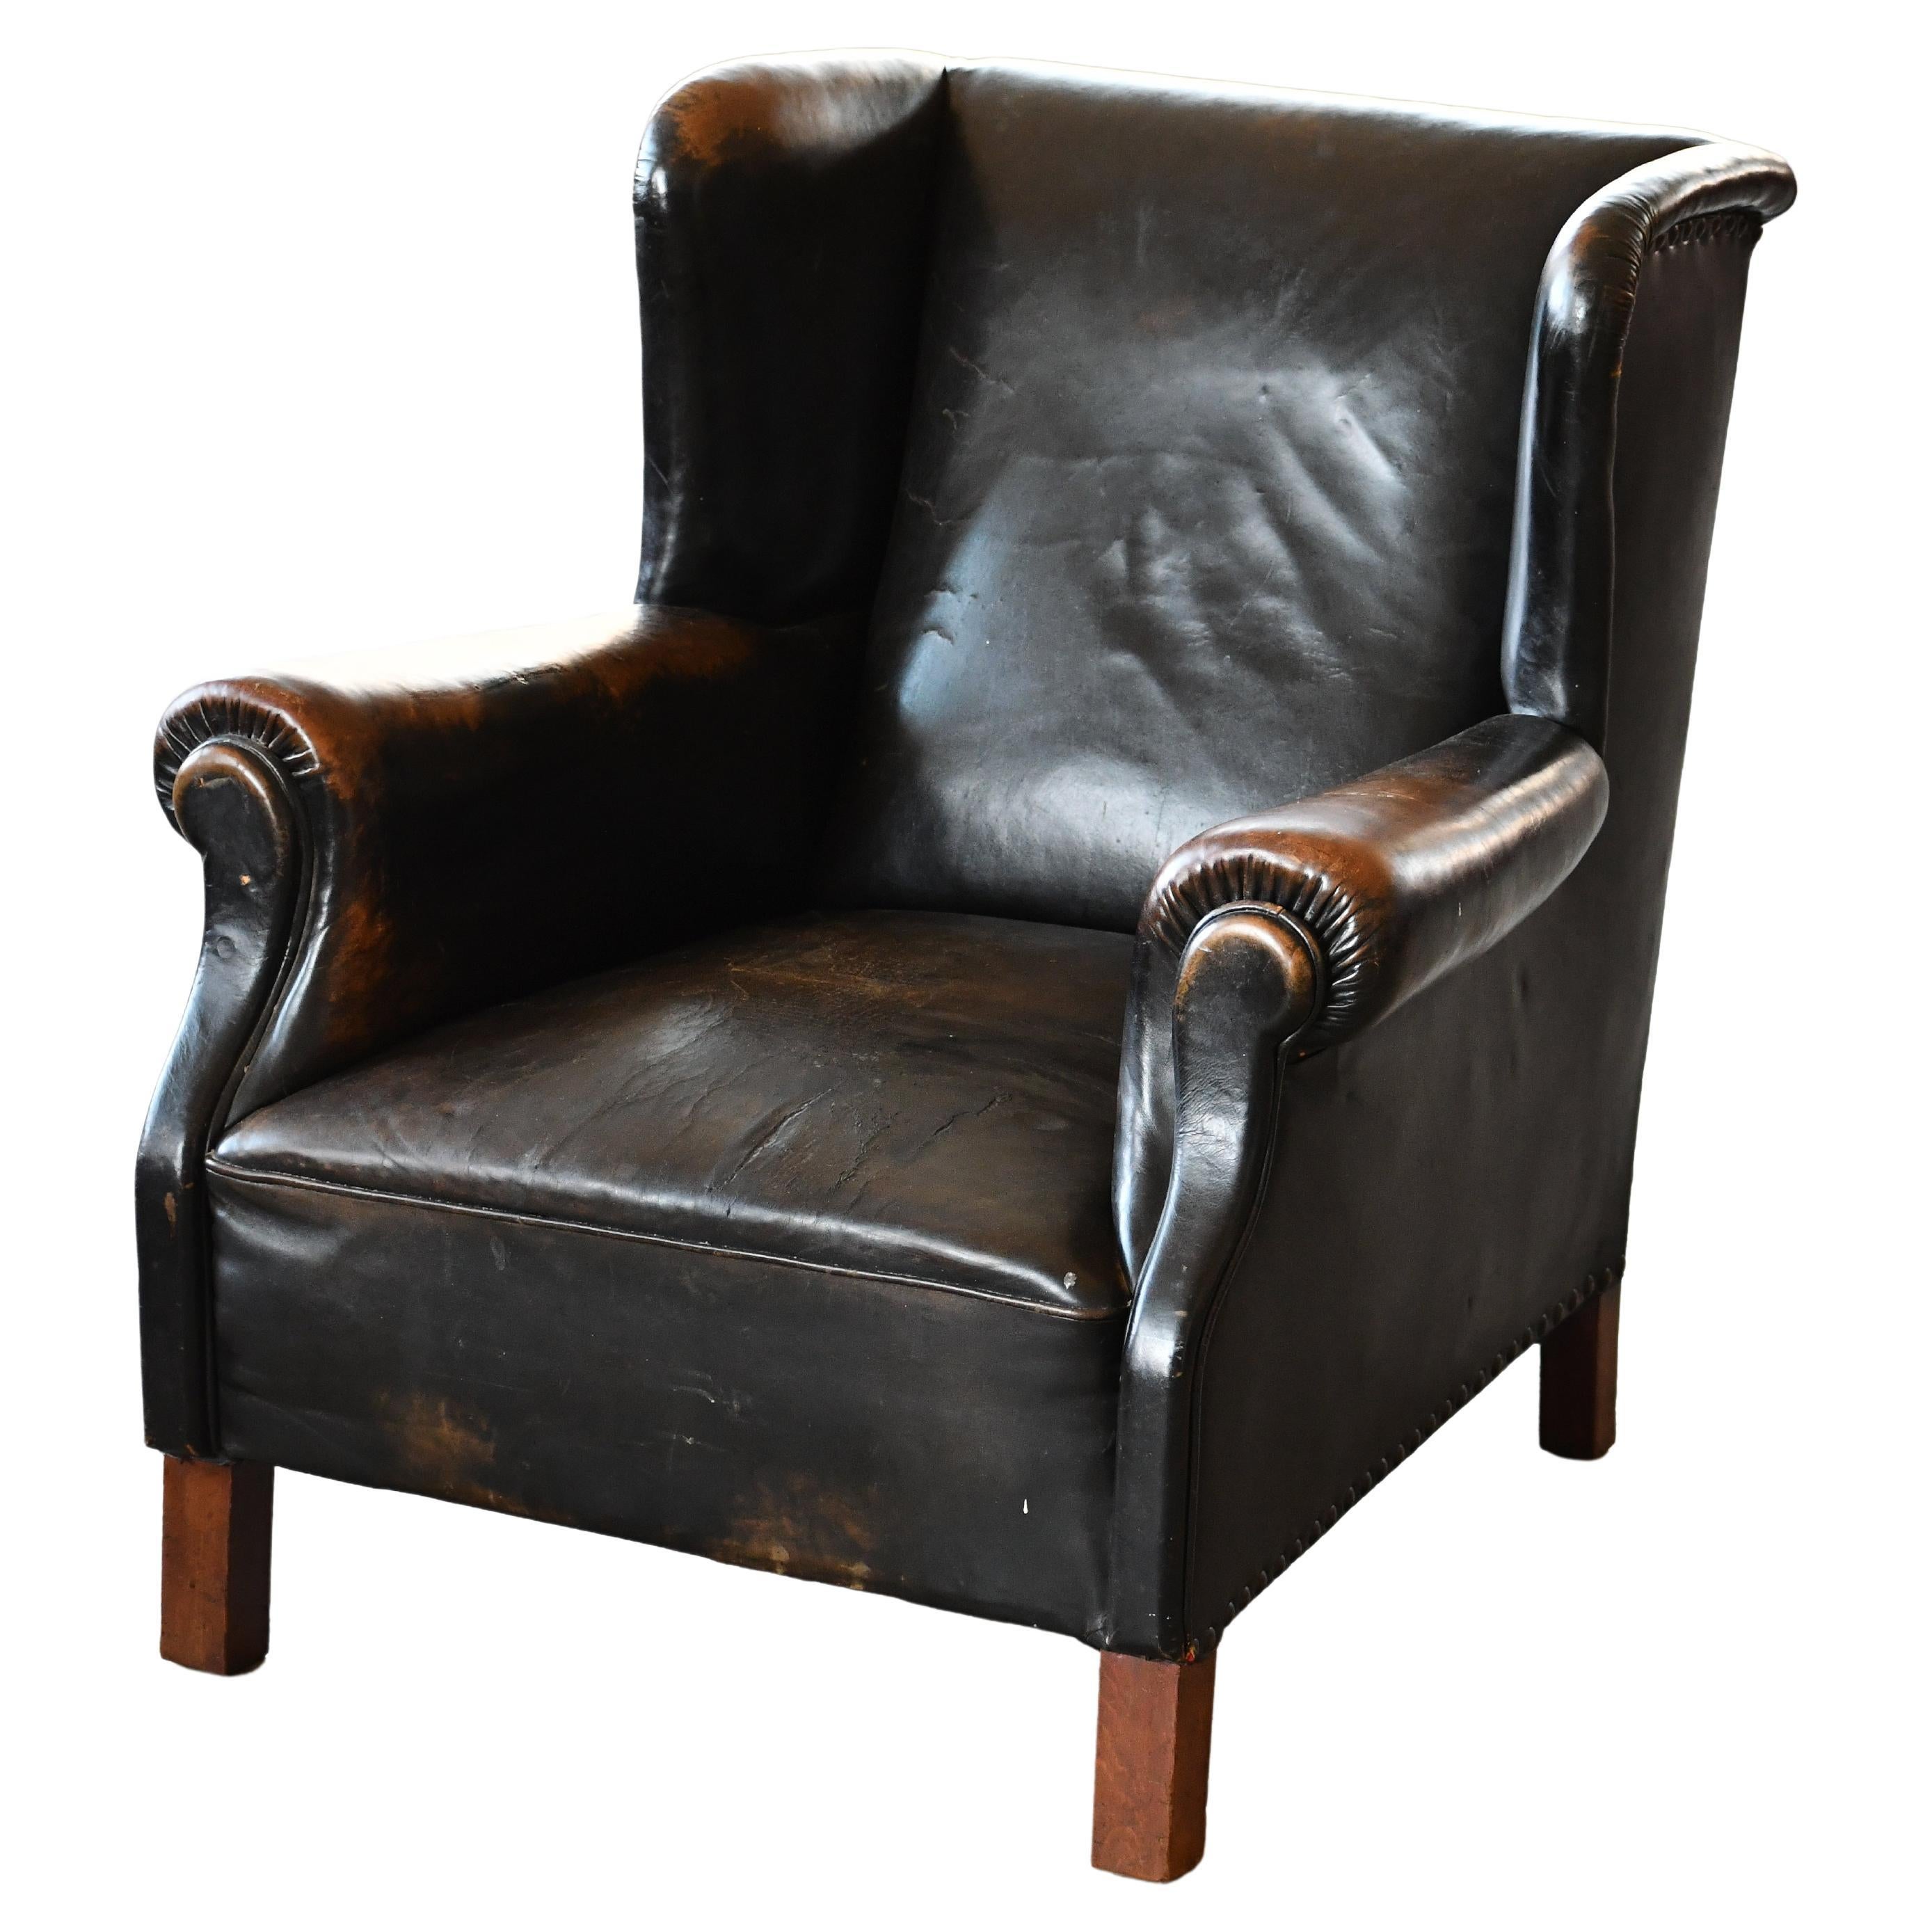 A rare find. Large wingback lounge chair in black leather. Maker unknown but the chair is much in the style of the Fritz Hansen chairs at the time. The leather remains supple and in unusual good condition for its age with lots of noble patina and